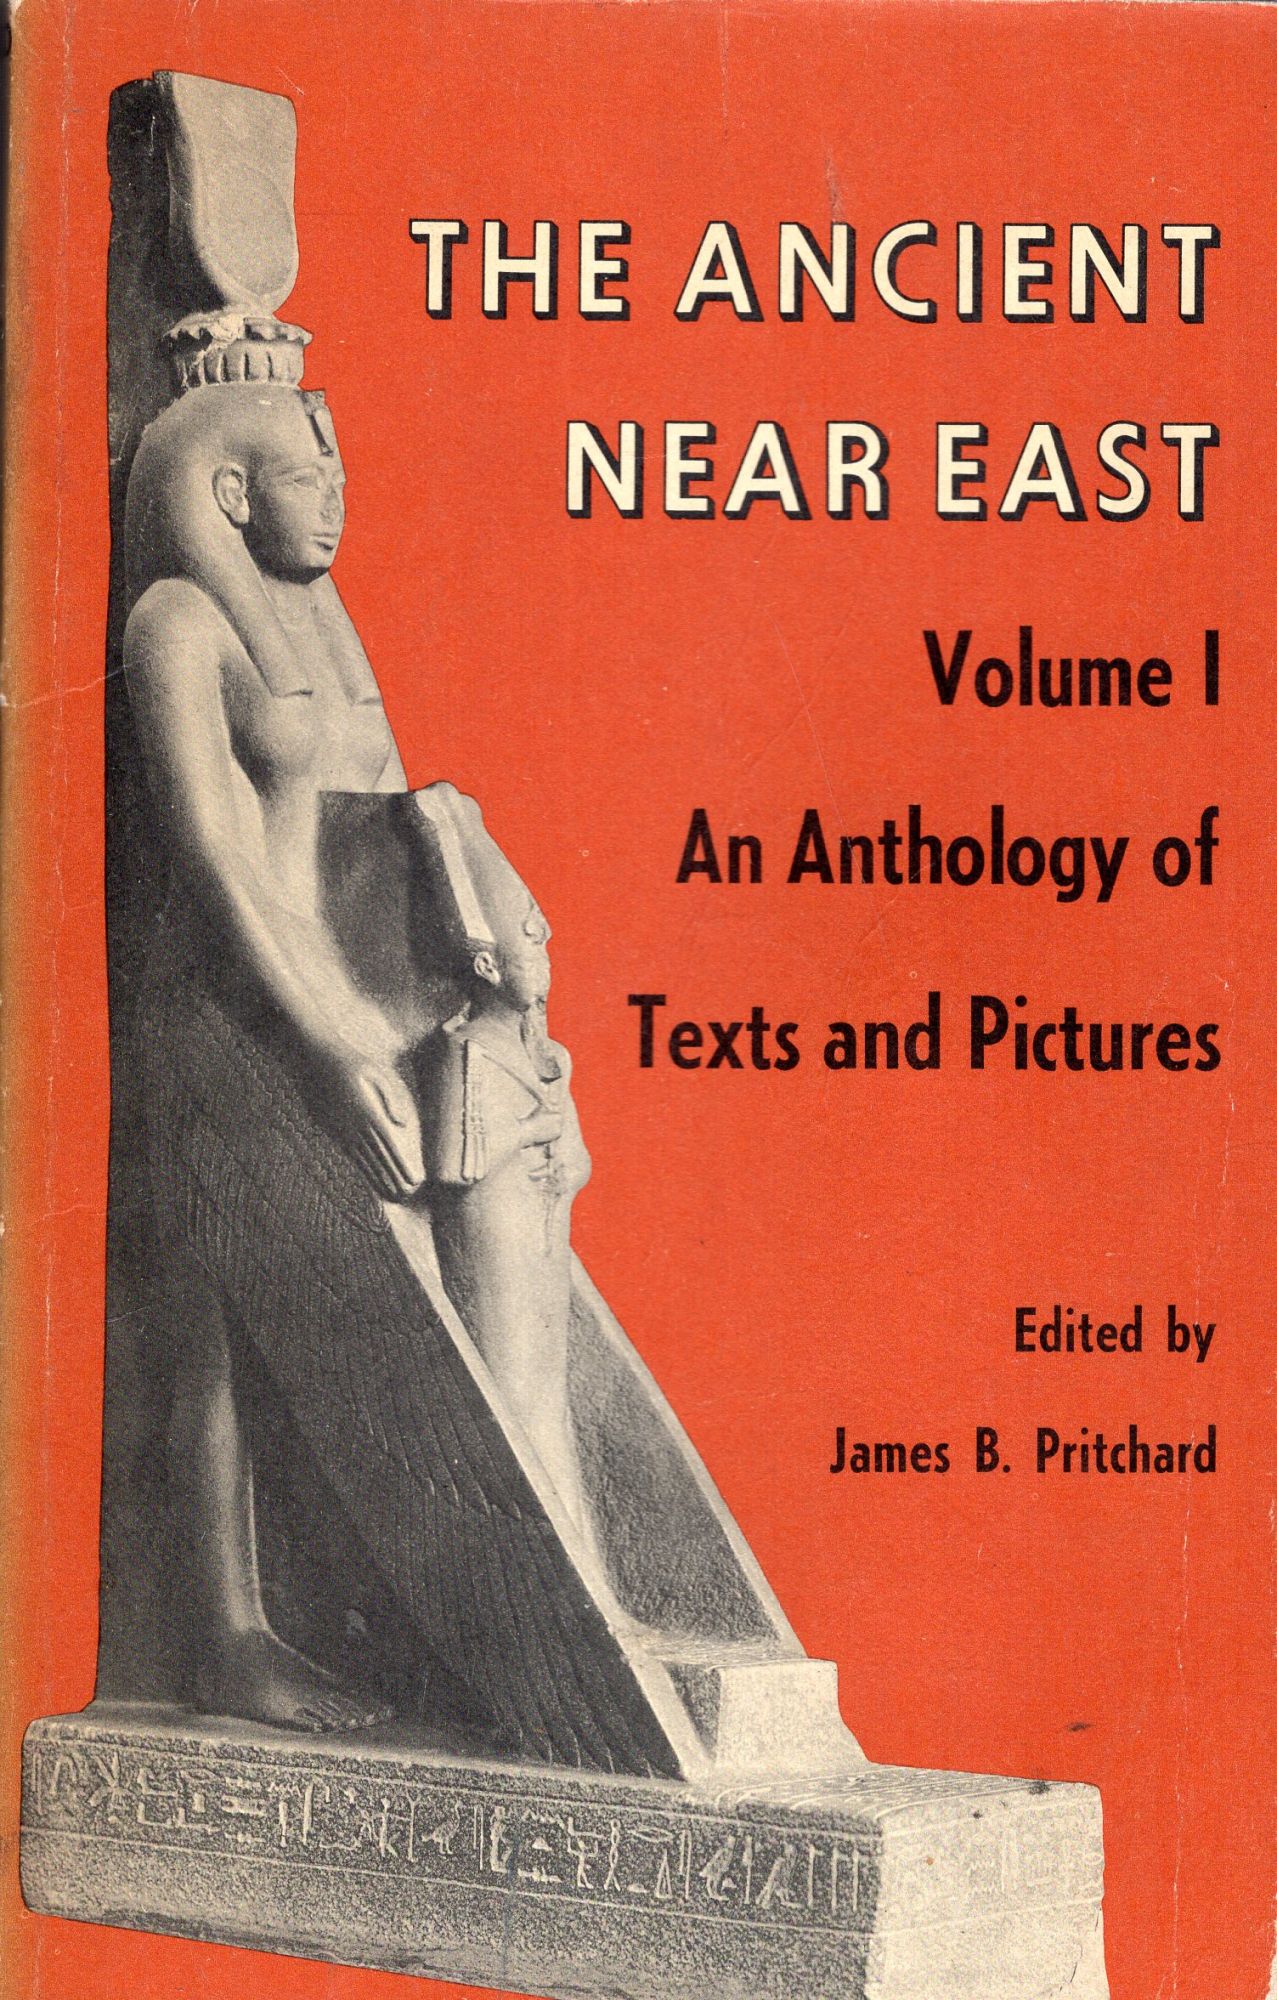 The Ancient Near East, Volume 1: An Anthology of Texts and Pictures by  James B. Pritchard on A Cappella Books